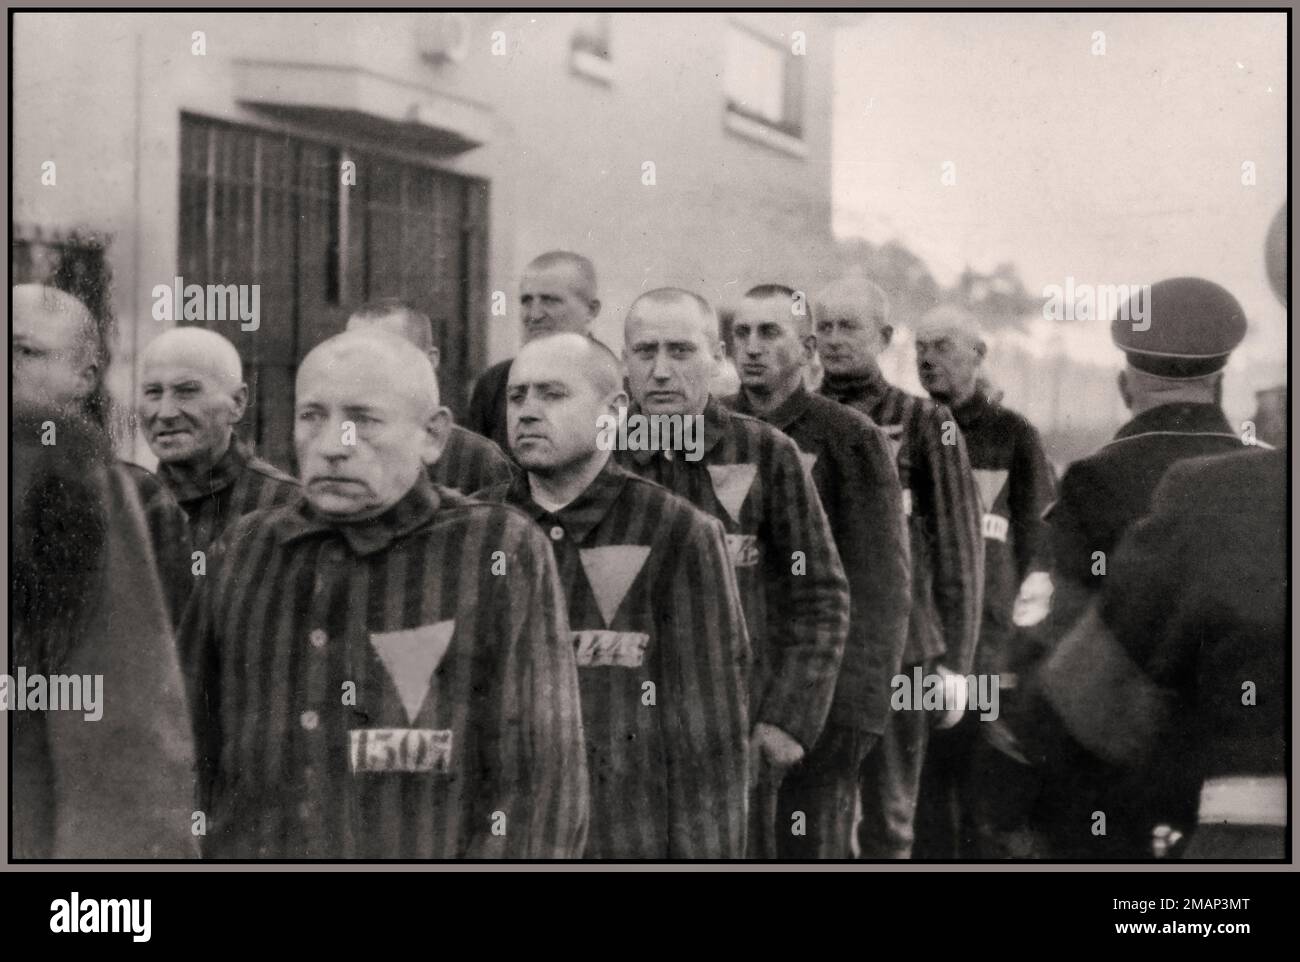 SACHSENHAUSEN Prisoners wearing striped uniforms with numbers and triangles in the concentration camp at Sachsenhausen, Germany. SS camp guards wearing Swastika armbands.  Pre-war Prisoners in the concentration camp at Sachsenhausen, Germany, 12-19-1938 Stock Photo